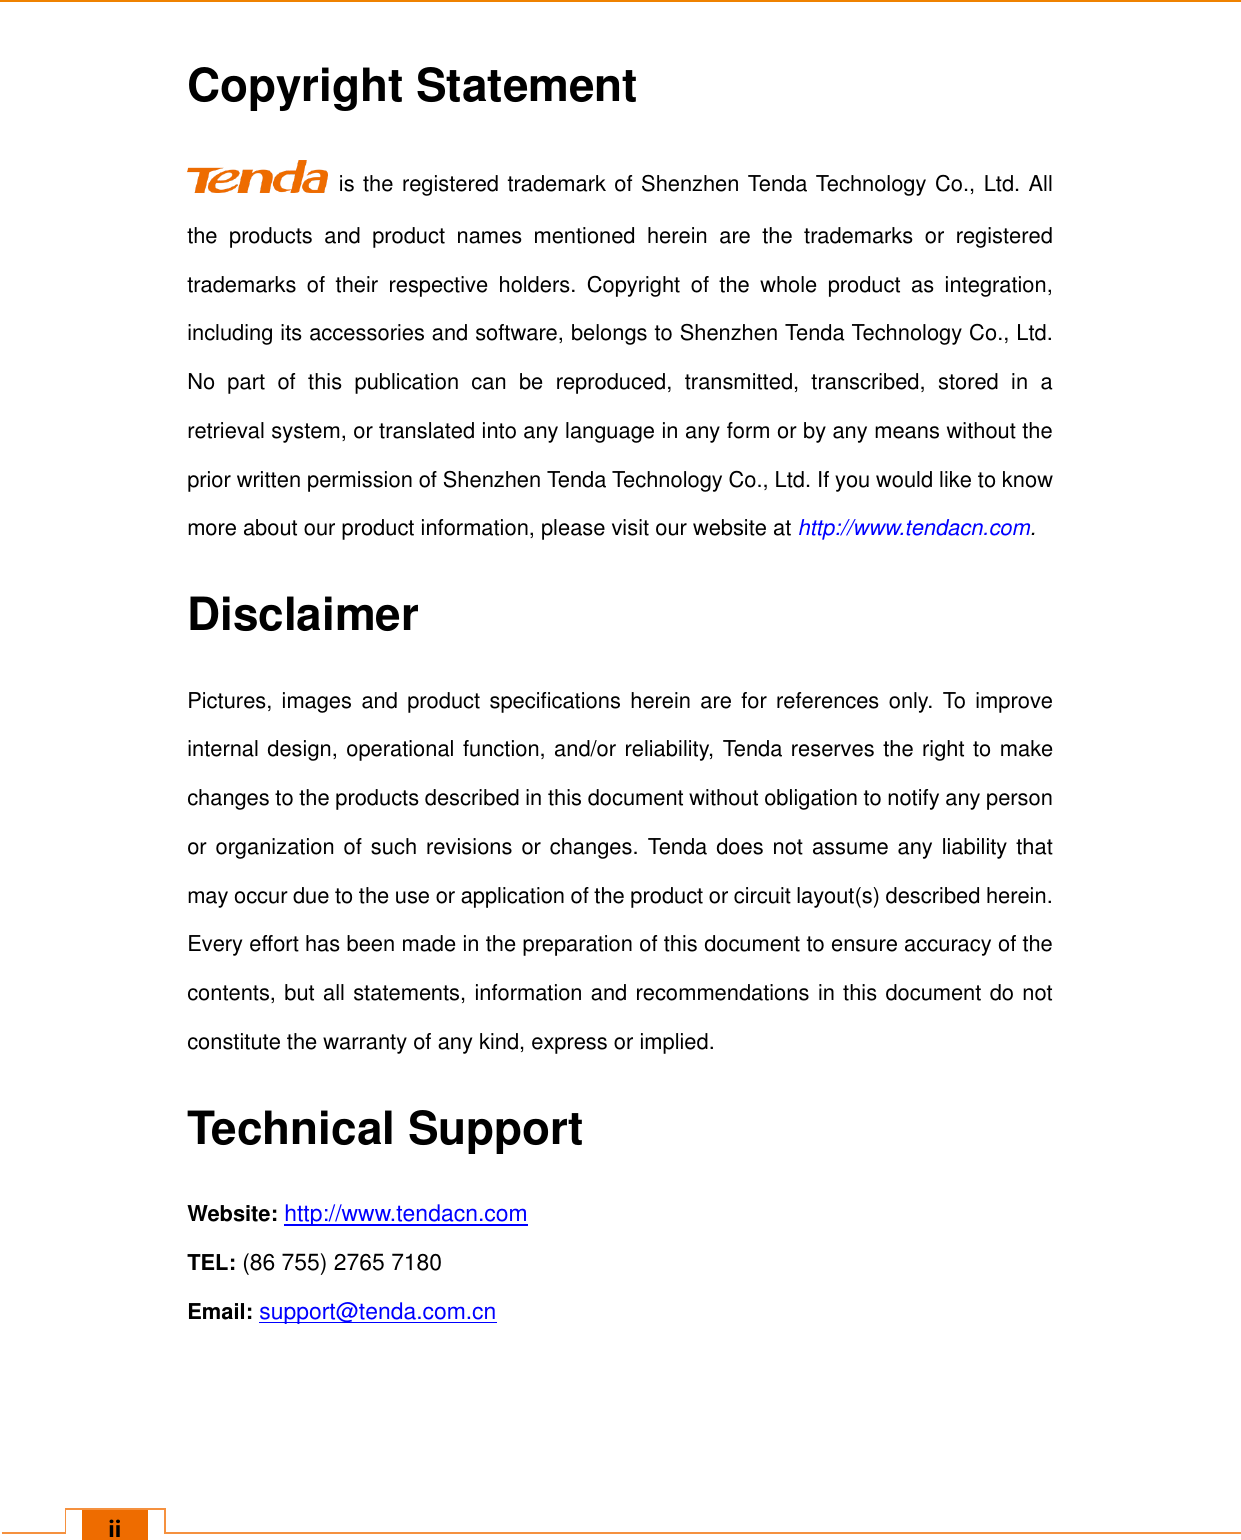   ii Copyright Statement  is the registered trademark of Shenzhen Tenda Technology Co., Ltd. All the  products  and  product  names  mentioned  herein  are  the  trademarks  or  registered trademarks  of  their  respective  holders.  Copyright  of  the  whole  product  as  integration, including its accessories and software, belongs to Shenzhen Tenda Technology Co., Ltd. No  part  of  this  publication  can  be  reproduced,  transmitted,  transcribed,  stored  in  a retrieval system, or translated into any language in any form or by any means without the prior written permission of Shenzhen Tenda Technology Co., Ltd. If you would like to know more about our product information, please visit our website at http://www.tendacn.com. Disclaimer Pictures, images and product specifications herein are for references only. To  improve internal design, operational function, and/or reliability, Tenda reserves the right to make changes to the products described in this document without obligation to notify any person or organization of such revisions or changes. Tenda does not assume any liability that may occur due to the use or application of the product or circuit layout(s) described herein. Every effort has been made in the preparation of this document to ensure accuracy of the contents, but all statements, information and recommendations in this document do not constitute the warranty of any kind, express or implied.   Technical Support Website: http://www.tendacn.com TEL: (86 755) 2765 7180   Email: support@tenda.com.cn 